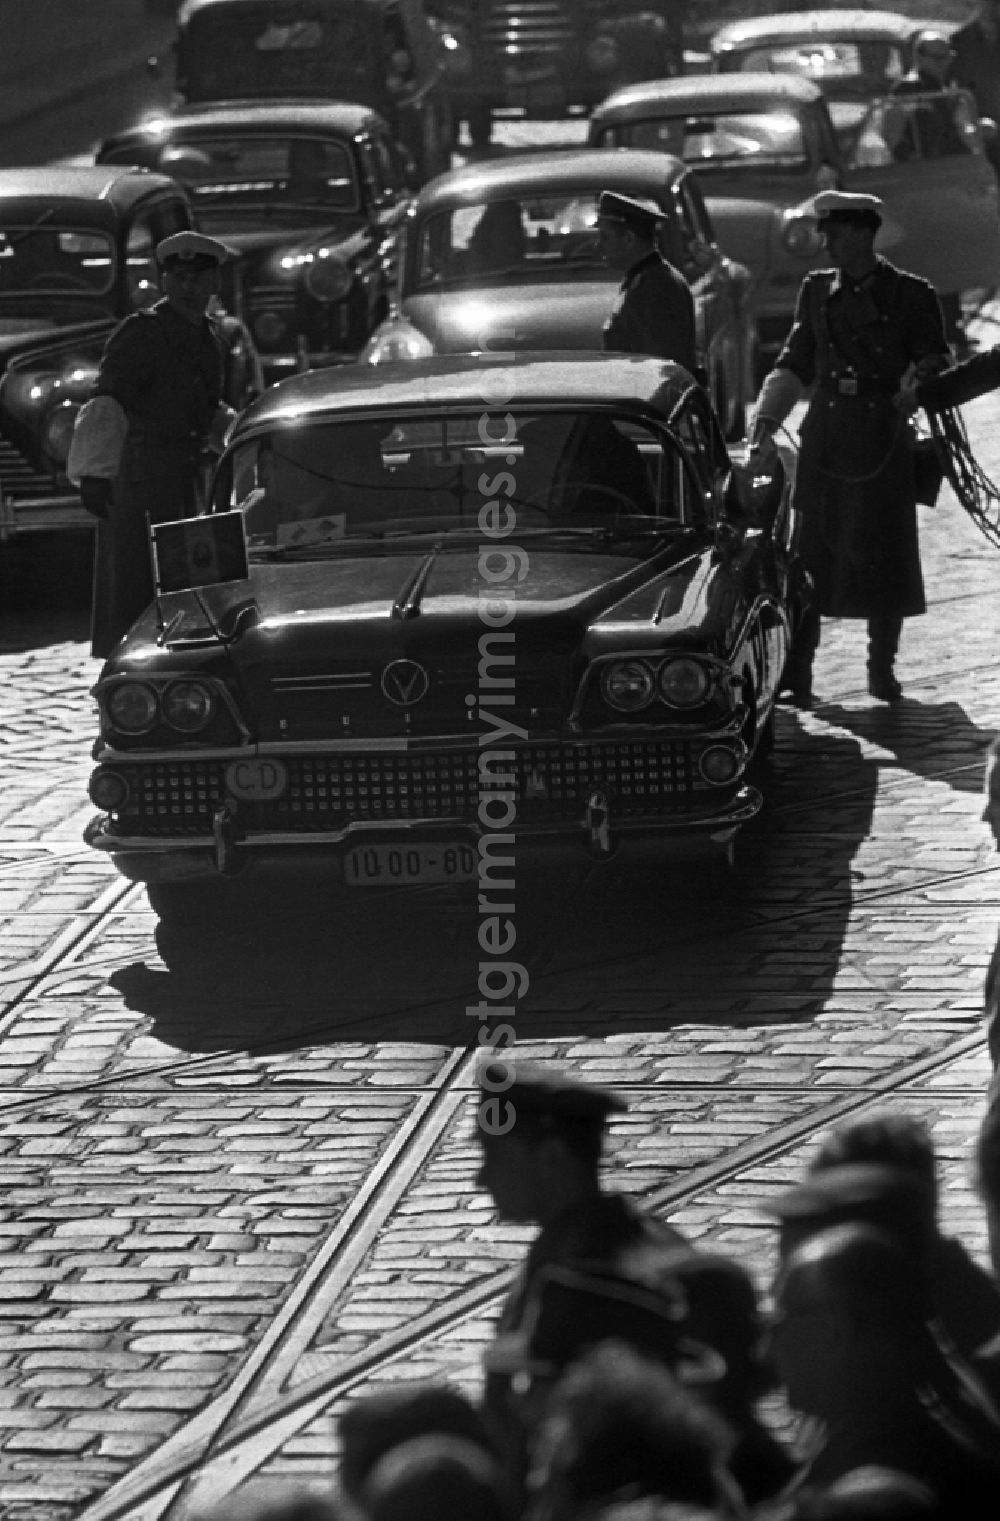 GDR image archive: Berlin - Motorcade during the state visit of the Polish Prime Minister Jozef Cyrankiewicz and the PVAP party leader Wladyslaw Gomulka in Berlin on the territory of the former GDR, German Democratic Republic